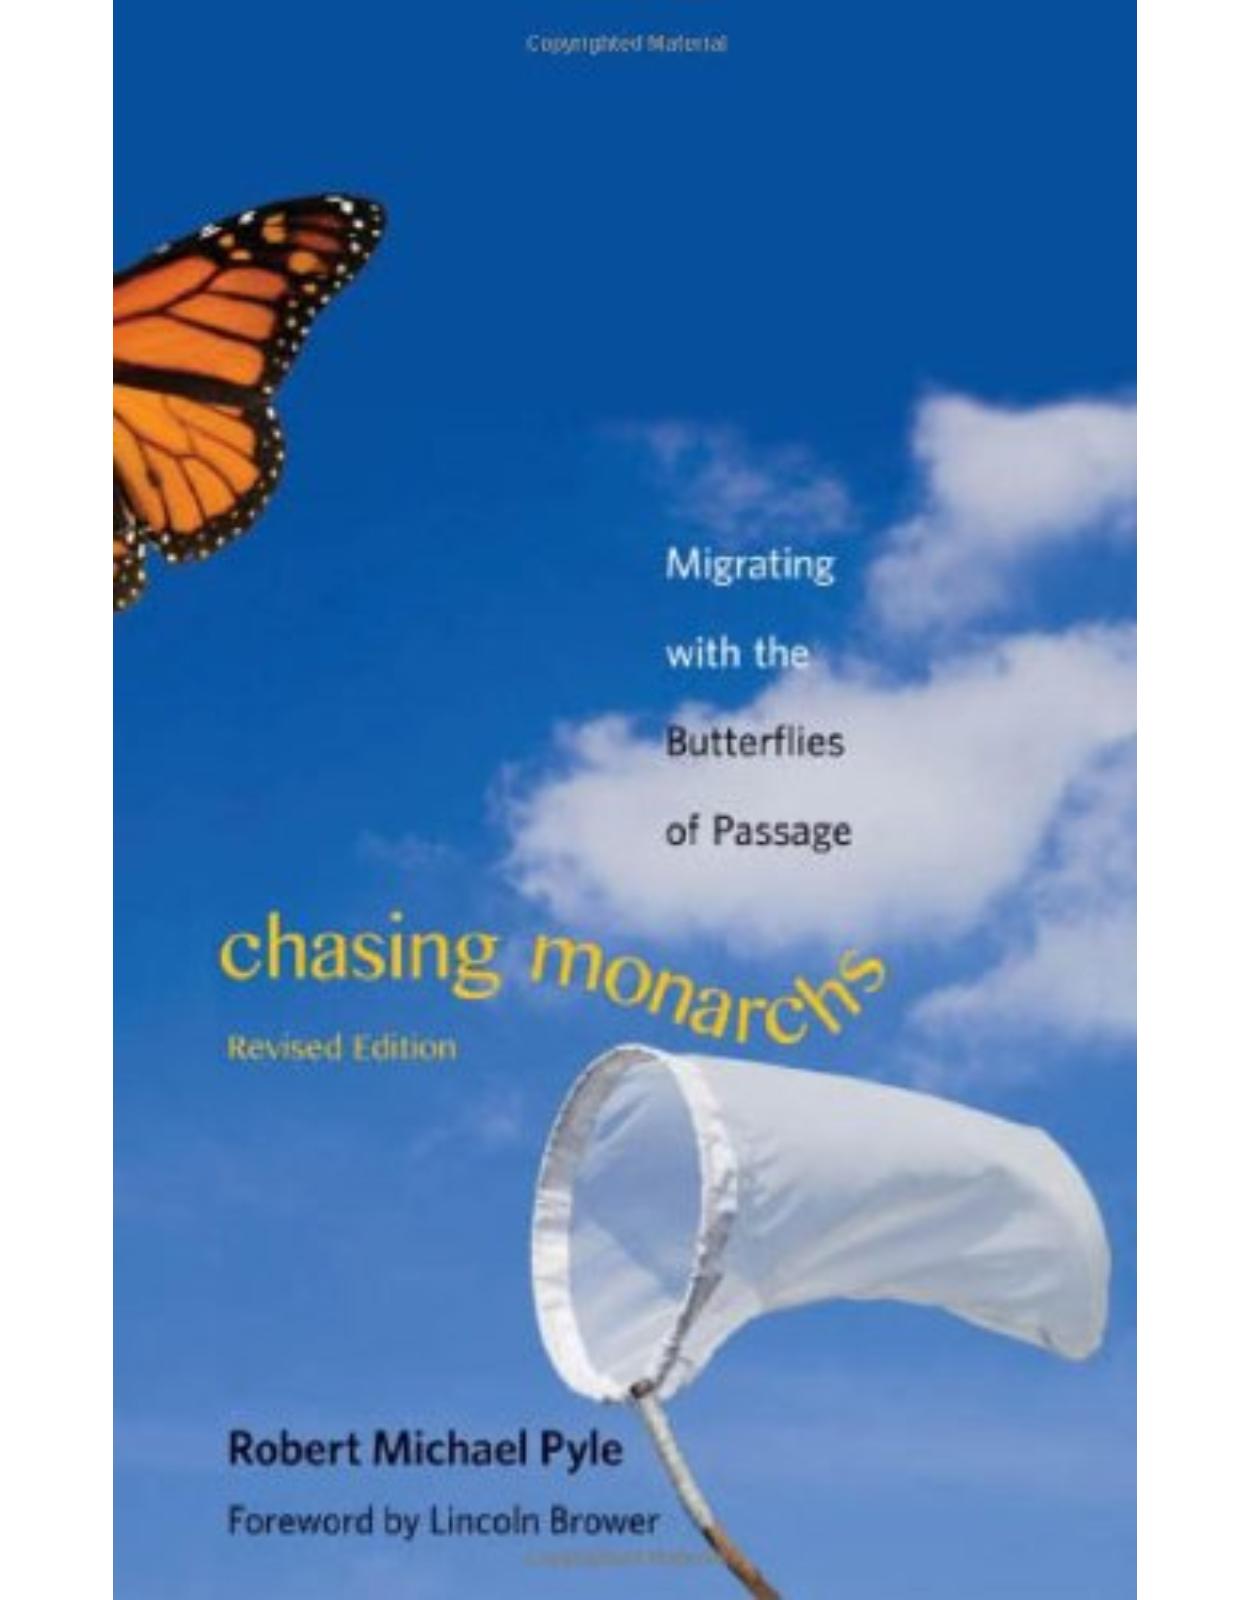 Chasing Monarchs. Migrating with the Butterflies of Passage